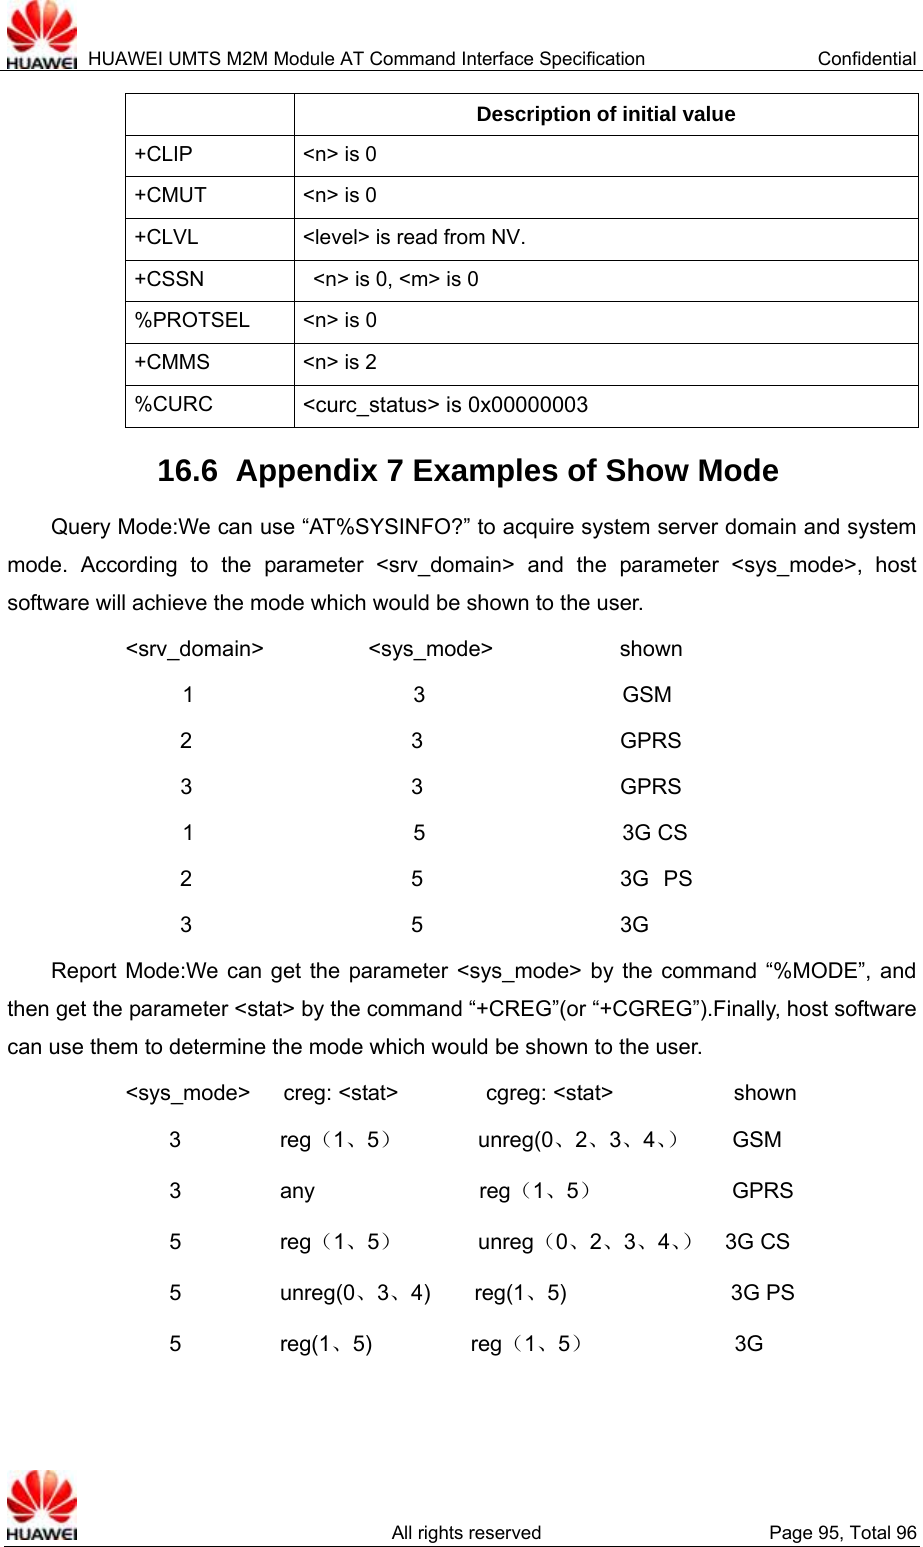  HUAWEI UMTS M2M Module AT Command Interface Specification  Confidential   All rights reserved  Page 95, Total 96  Description of initial value +CLIP  &lt;n&gt; is 0 +CMUT  &lt;n&gt; is 0 +CLVL  &lt;level&gt; is read from NV. +CSSN    &lt;n&gt; is 0, &lt;m&gt; is 0 %PROTSEL  &lt;n&gt; is 0 +CMMS  &lt;n&gt; is 2 %CURC  &lt;curc_status&gt; is 0x00000003 16.6  Appendix 7 Examples of Show Mode Query Mode:We can use “AT%SYSINFO?” to acquire system server domain and system mode. According to the parameter &lt;srv_domain&gt; and the parameter &lt;sys_mode&gt;, host software will achieve the mode which would be shown to the user. &lt;srv_domain&gt;      &lt;sys_mode&gt;       shown  1                    3                  GSM   2                    3                  GPRS  3                    3                  GPRS   1                    5                  3G CS 2                    5                  3G  PS 3                    5                  3G Report Mode:We can get the parameter &lt;sys_mode&gt; by the command “%MODE”, and then get the parameter &lt;stat&gt; by the command “+CREG”(or “+CGREG”).Finally, host software can use them to determine the mode which would be shown to the user. &lt;sys_mode&gt;   creg: &lt;stat&gt;        cgreg: &lt;stat&gt;           shown 3         reg（1、5）       unreg(0、2、3、4、）    GSM 3         any               reg（1、5）            GPRS 5         reg（1、5）       unreg（0、2、3、4、）  3G CS 5         unreg(0、3、4)    reg(1、5)               3G PS 5         reg(1、5)         reg（1、5）             3G 